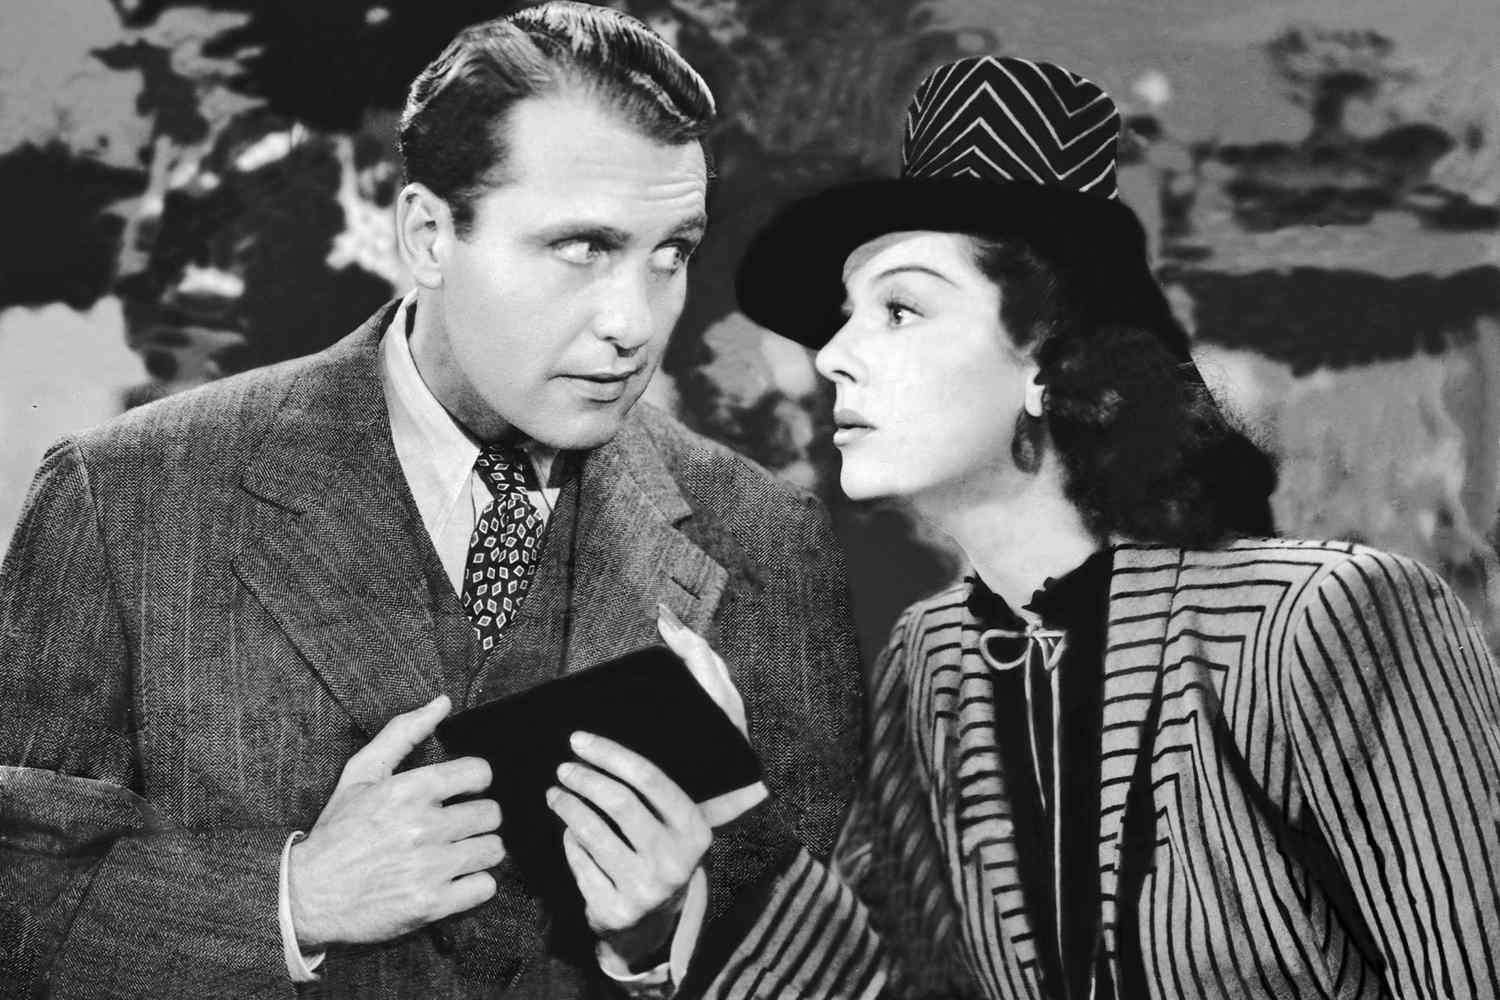 HIS GIRL FRIDAY, from left: Ralph Bellamy, Rosalind Russell, 1940